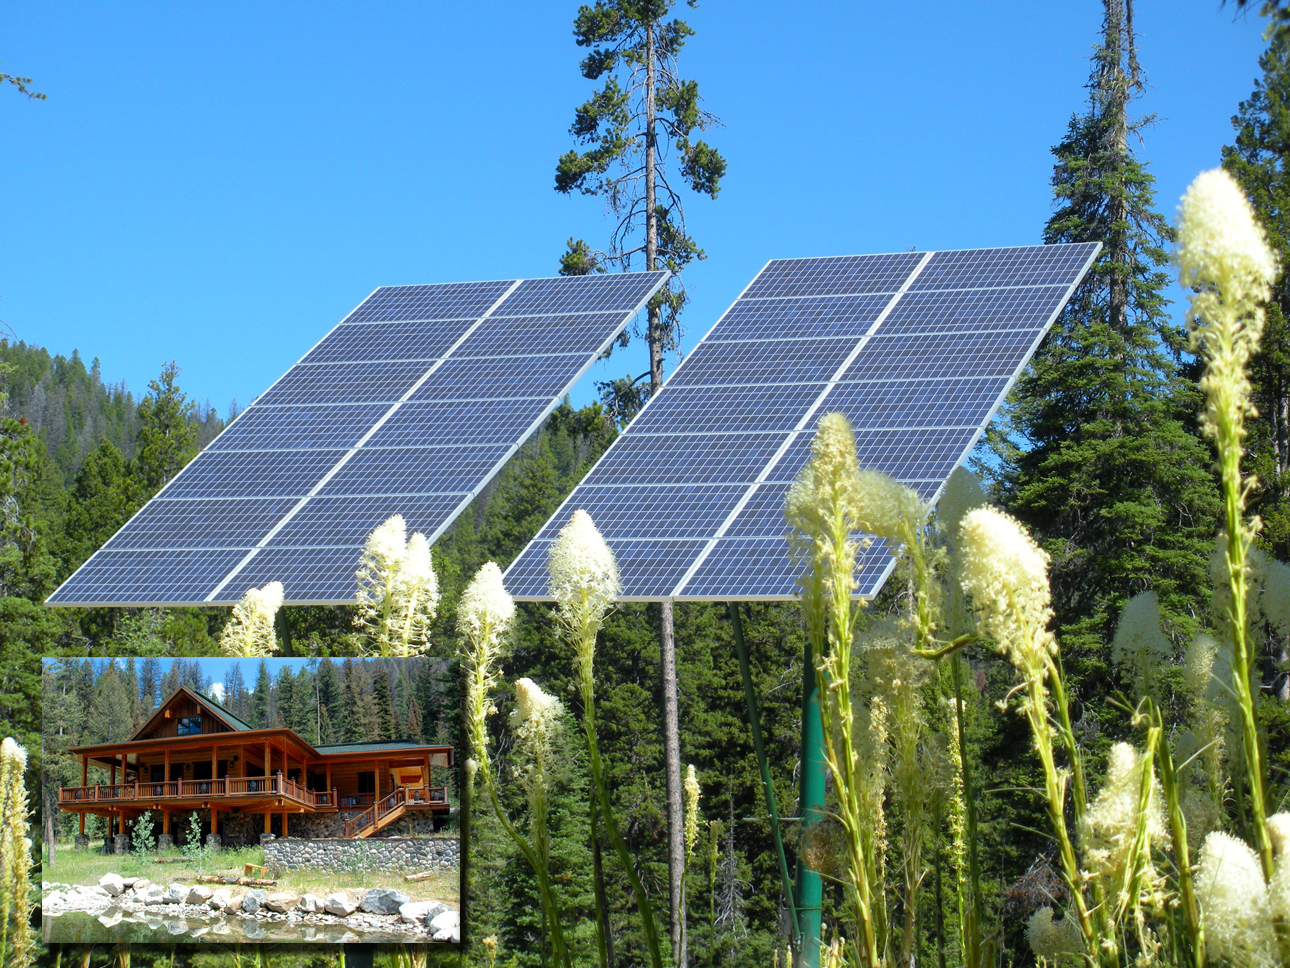 list-of-off-grid-solar-systems-canada-references-kacang-sancha-inci